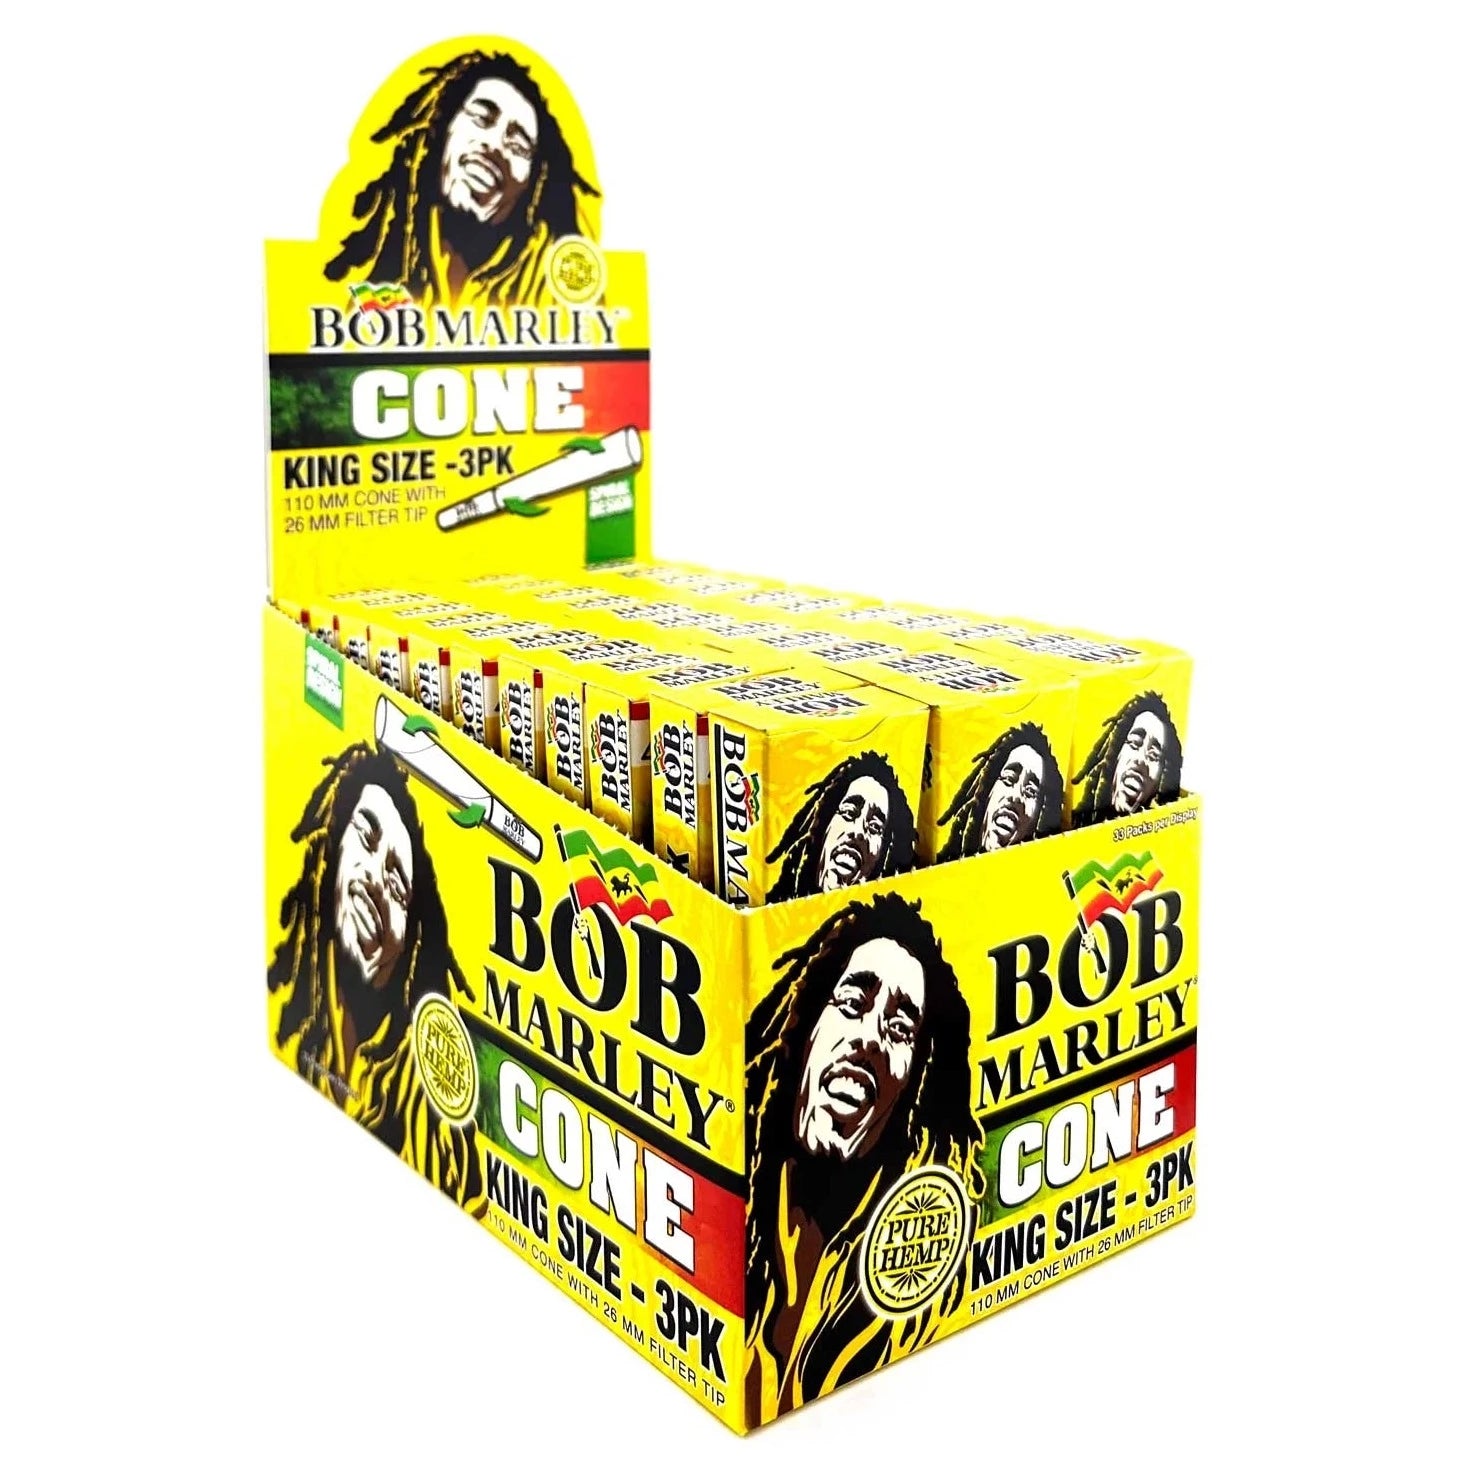 Bob Marley Rolling Paper King Size 3pk Pre-Rolled Cones Wholesale - 1 box / 33pcs